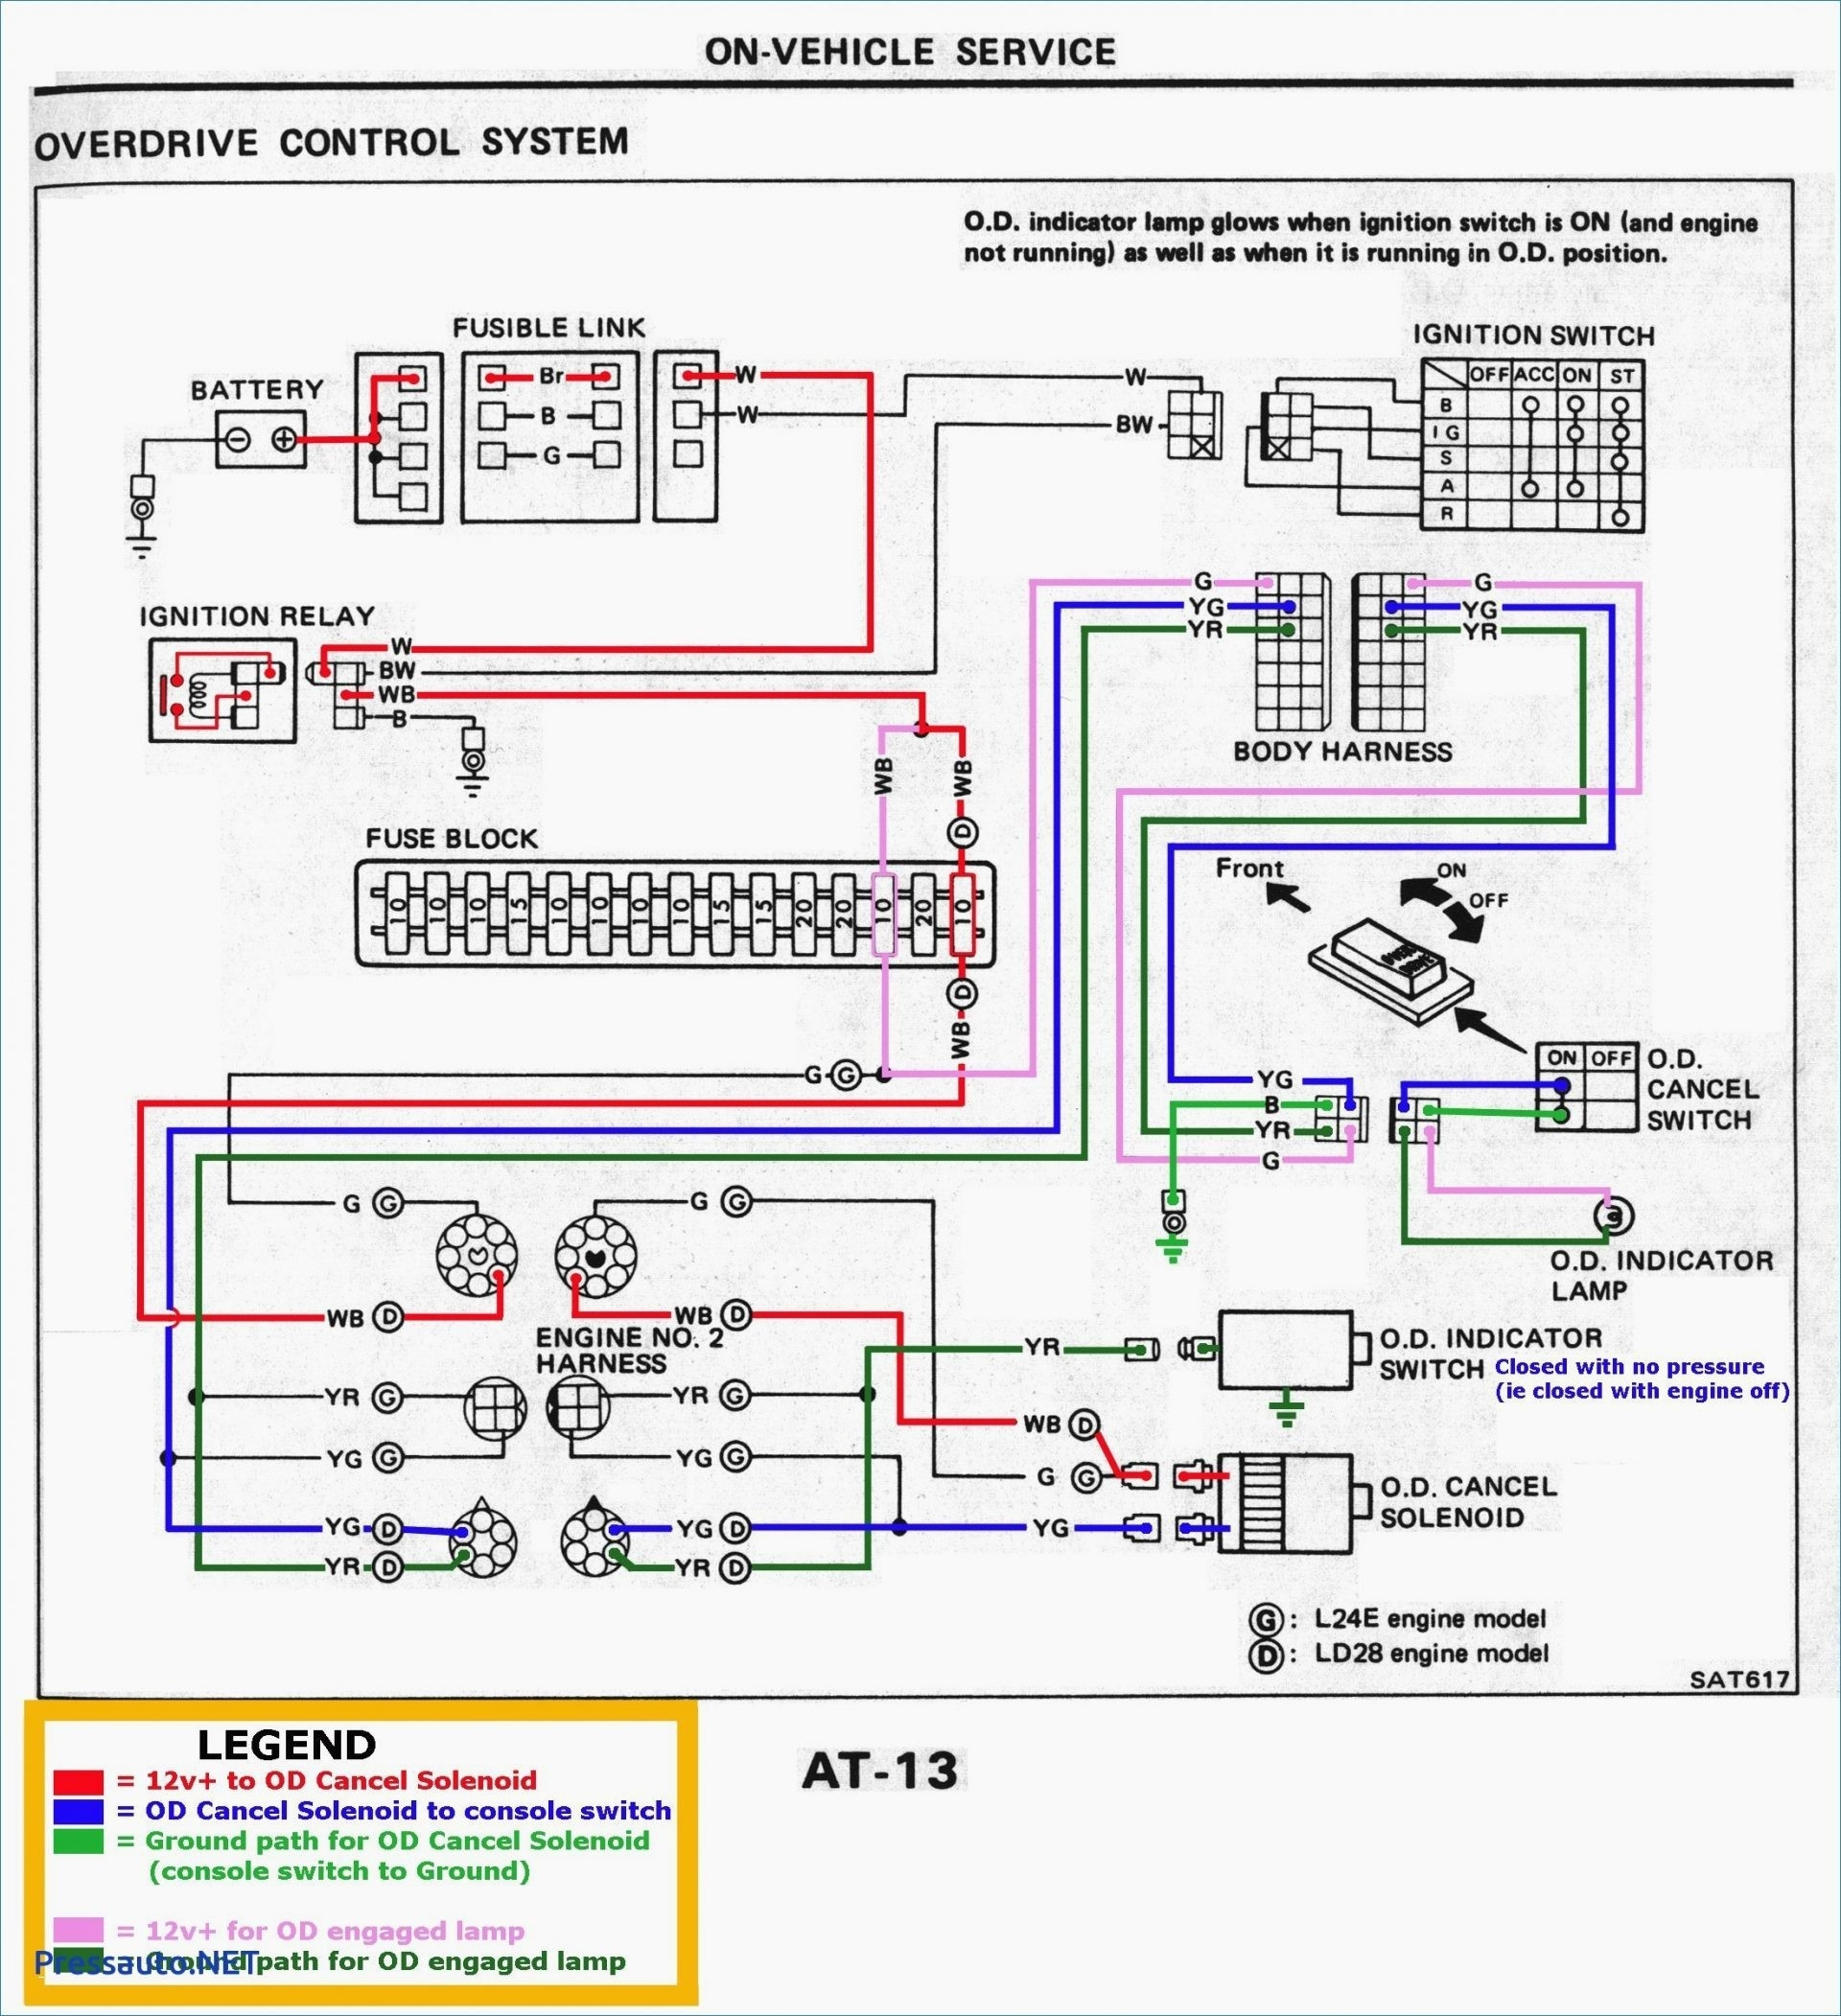 Ford Trailer Wiring Harness Diagram